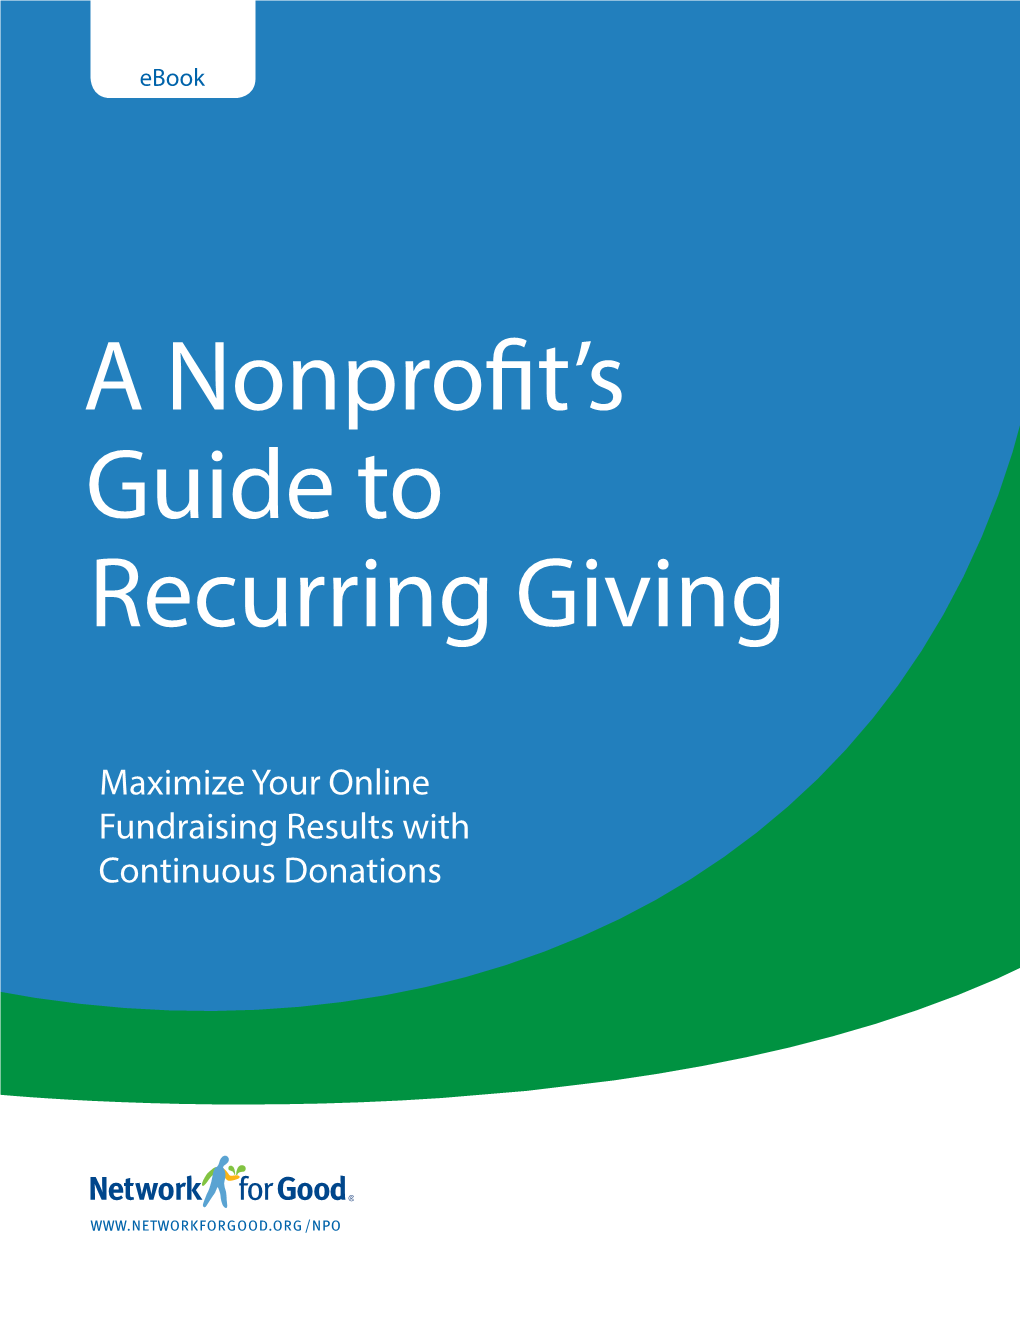 A Nonprofit's Guide to Recurring Giving